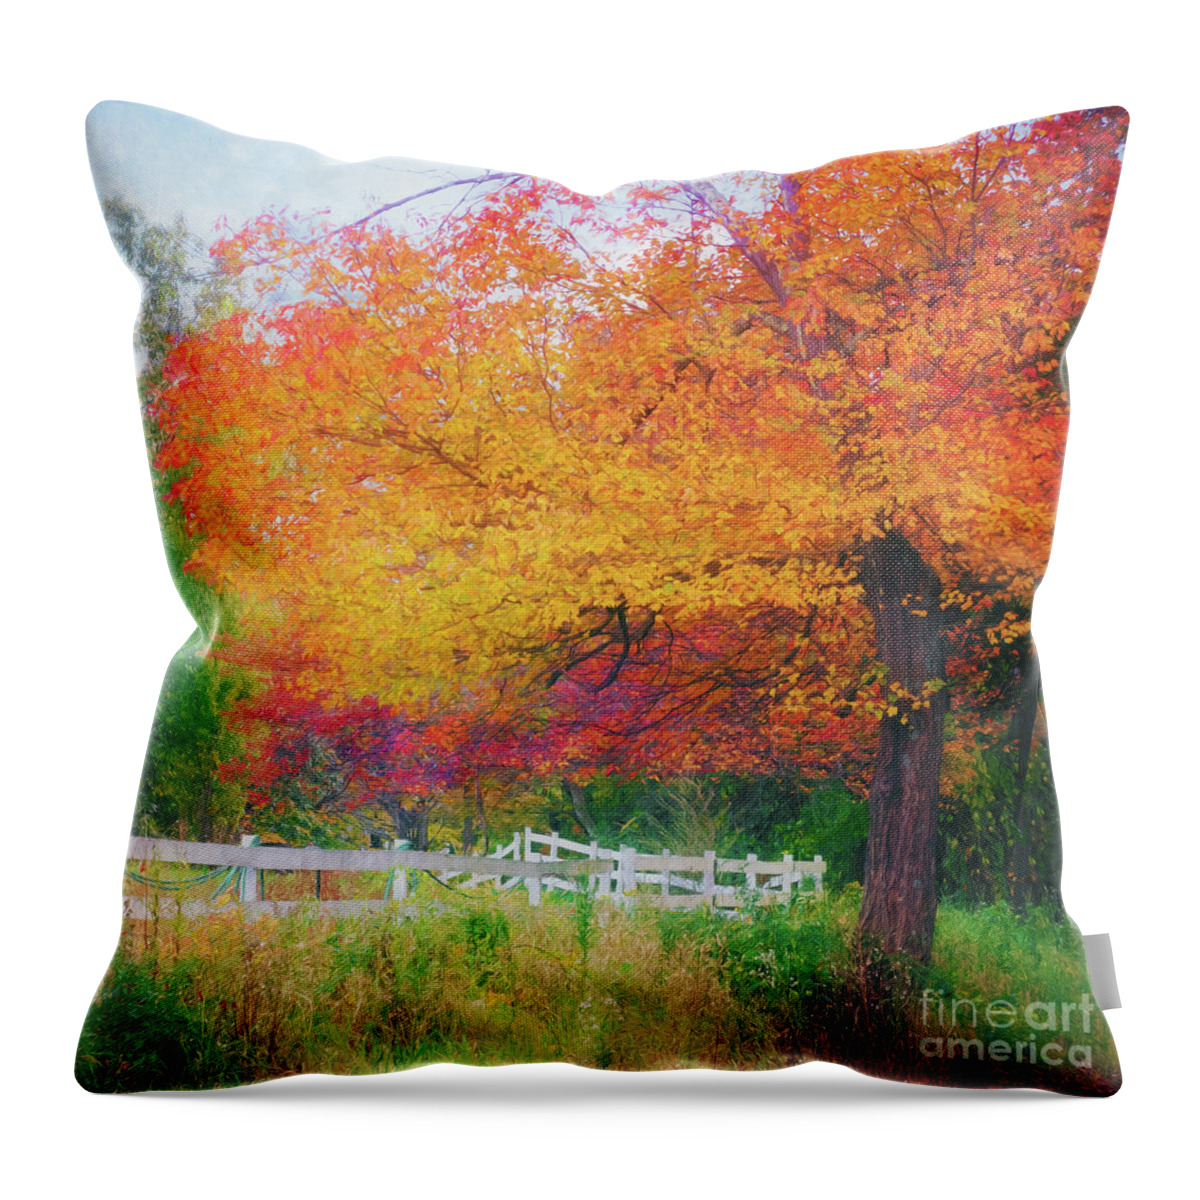 Fall Foliage Throw Pillow featuring the photograph Foliage by the Farm by Anita Pollak